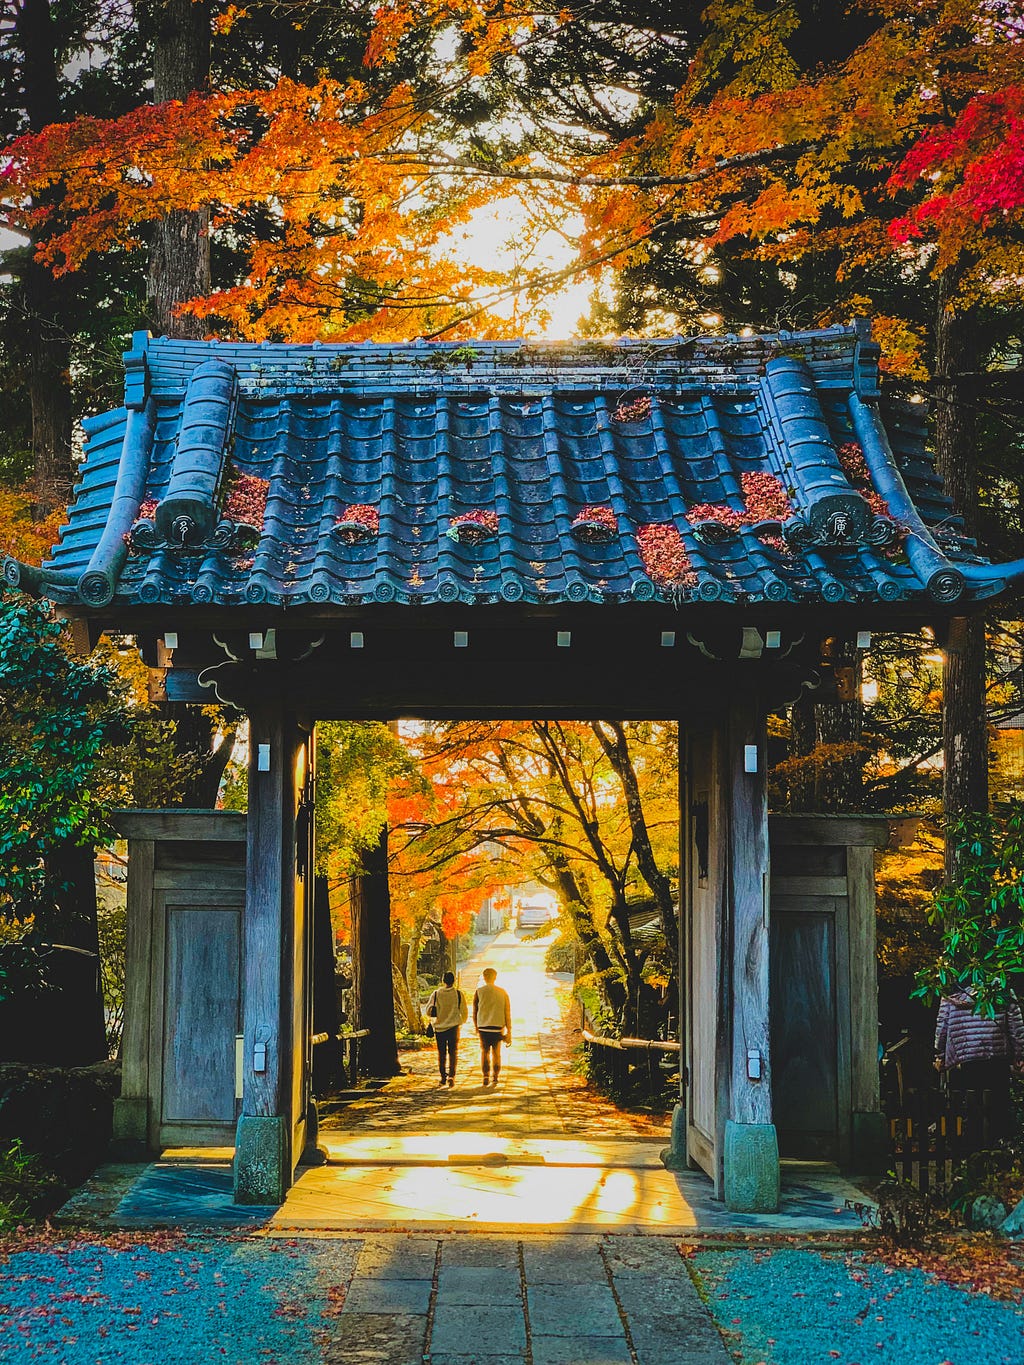 The photograph’s focal point is a lychgate, a charmingly tiled roof over a high wooden gate. The Japanese maples overhead and down the road glow  golden and orange. Two people, in the middle distance, are walking away, side by side in the sunlight.